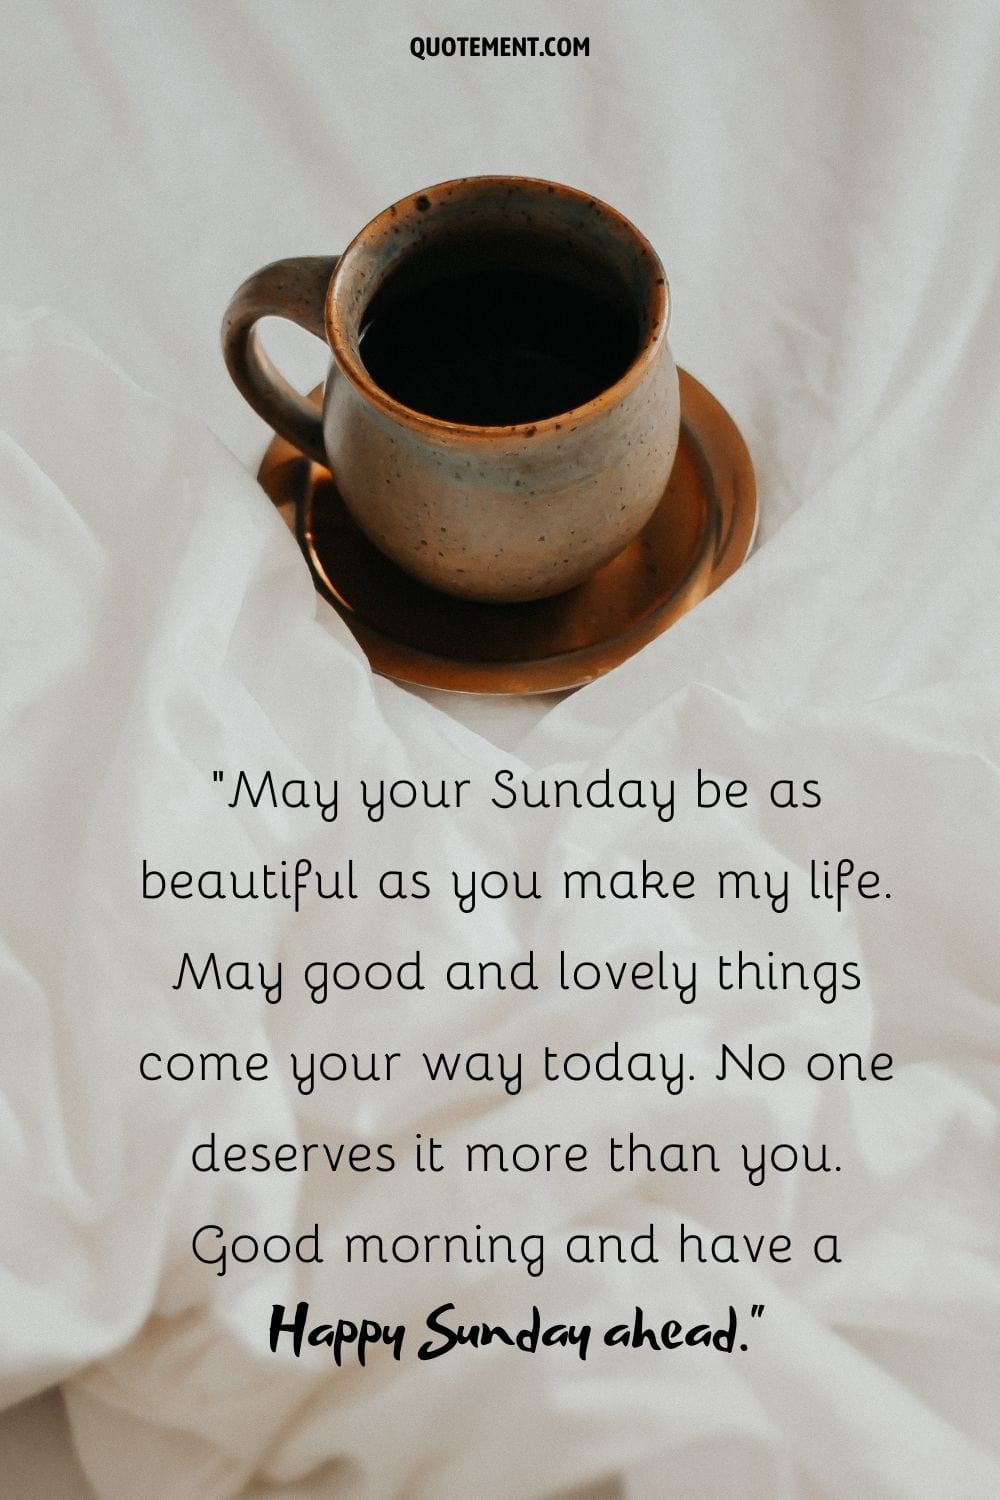 a brown coffee mug on the bed sheets representing good morning happy sunday quote